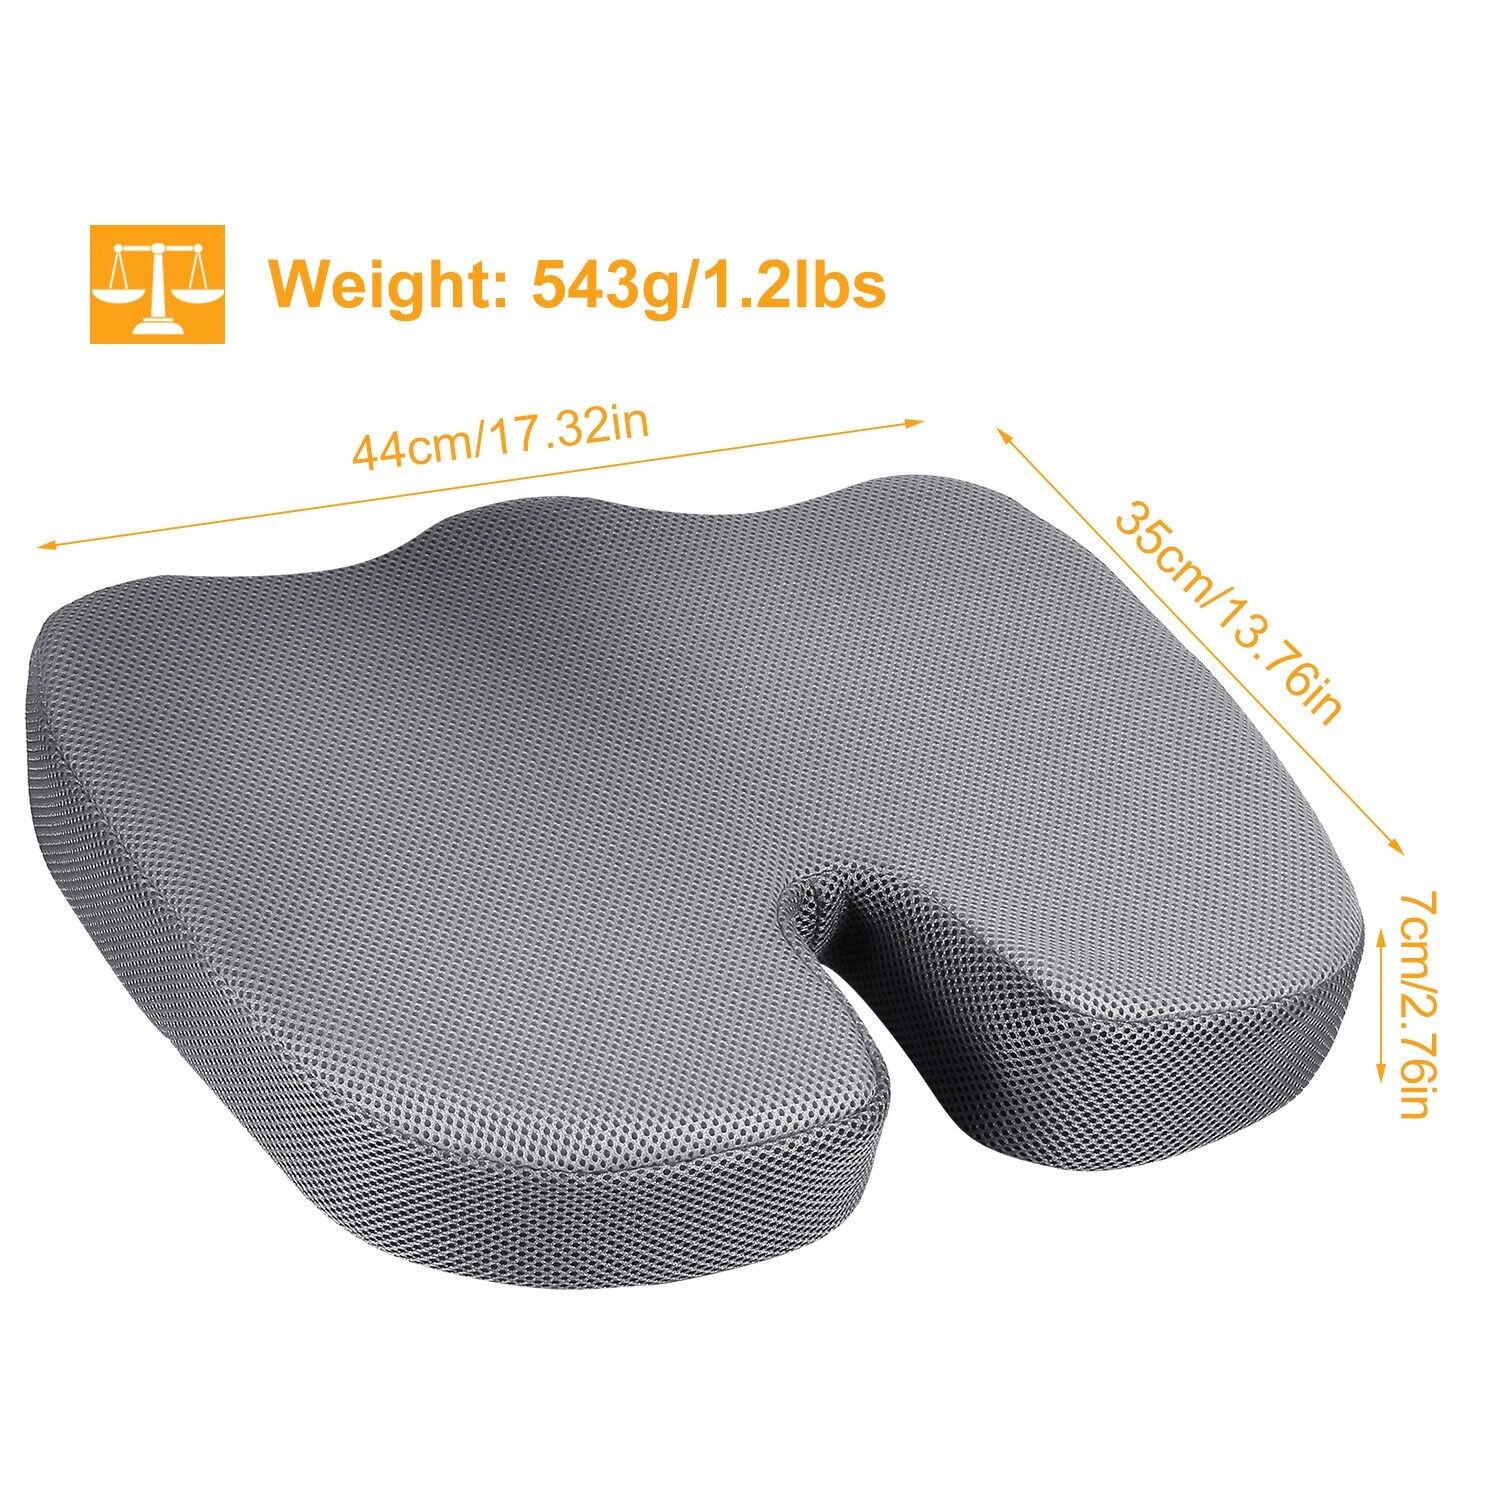 Home Office Seat Cushion, Comfort Memory Foam Chair Cushion for Tailbone,  Coccyx, Back & Sciatica Pain Relief, Gray